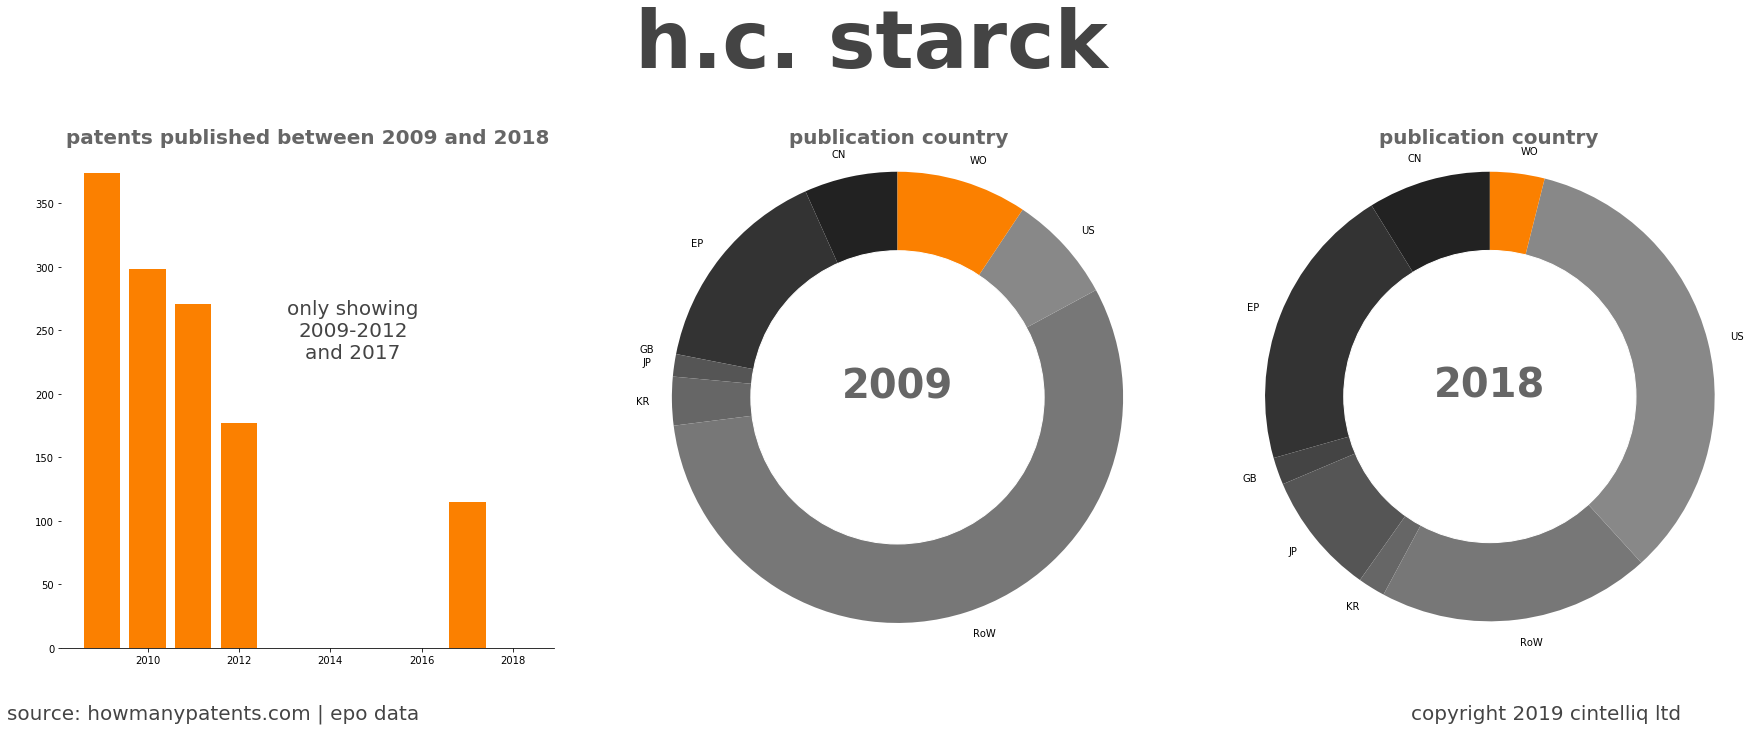 summary of patents for H.C. Starck